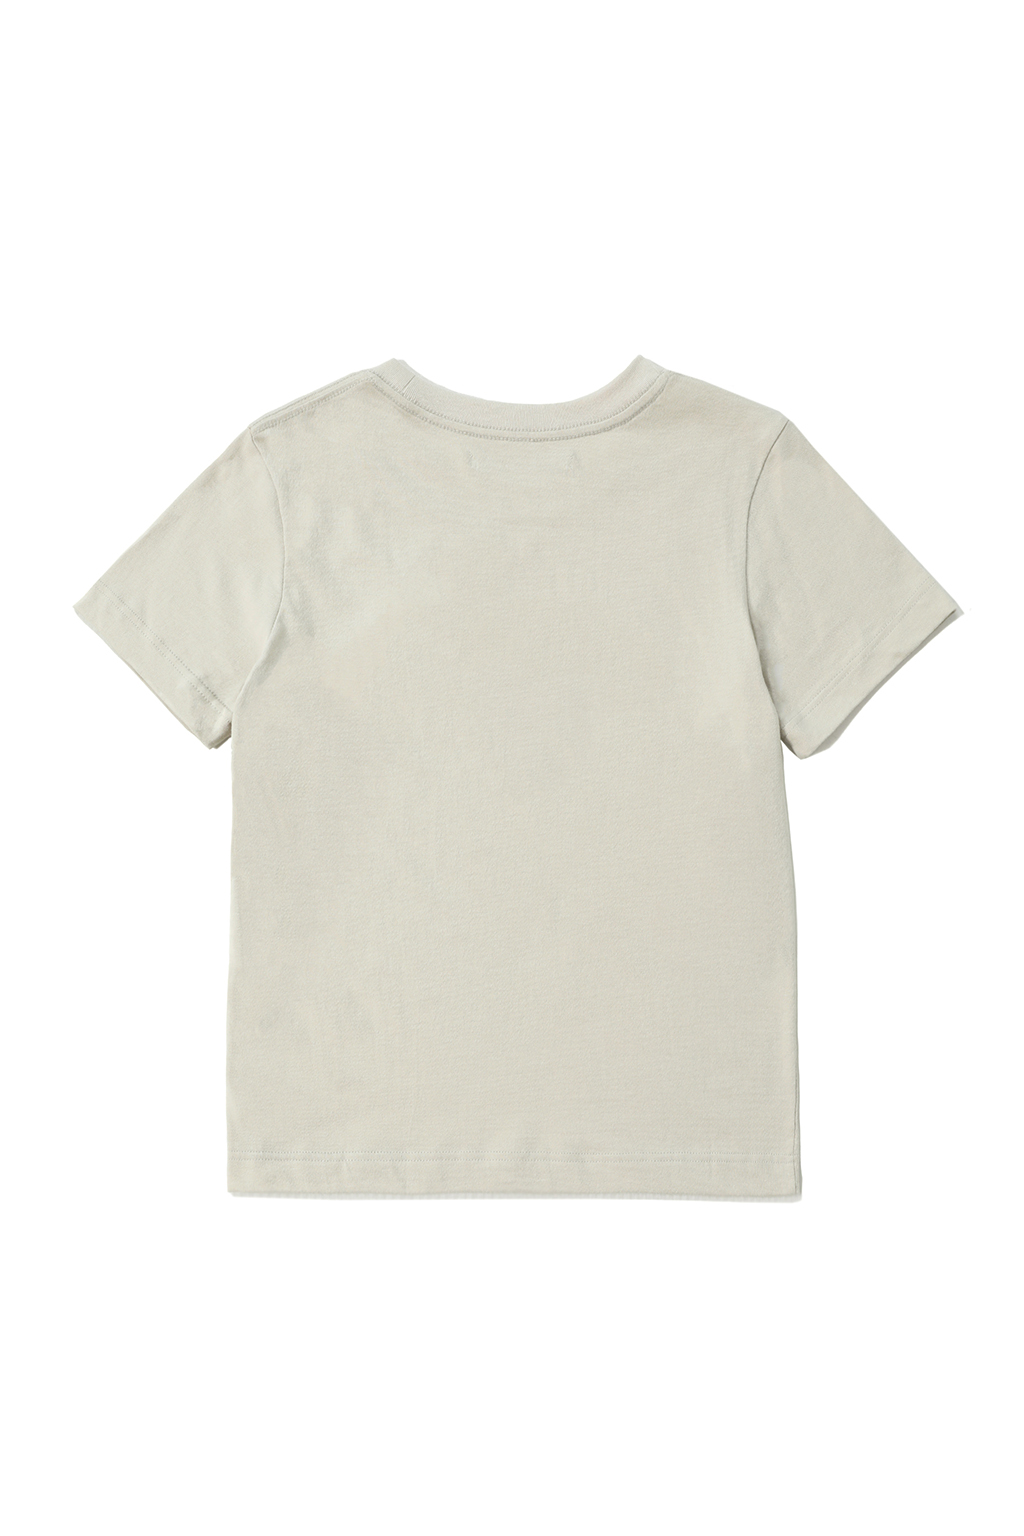 BALLET SHOES TEE [SAND]